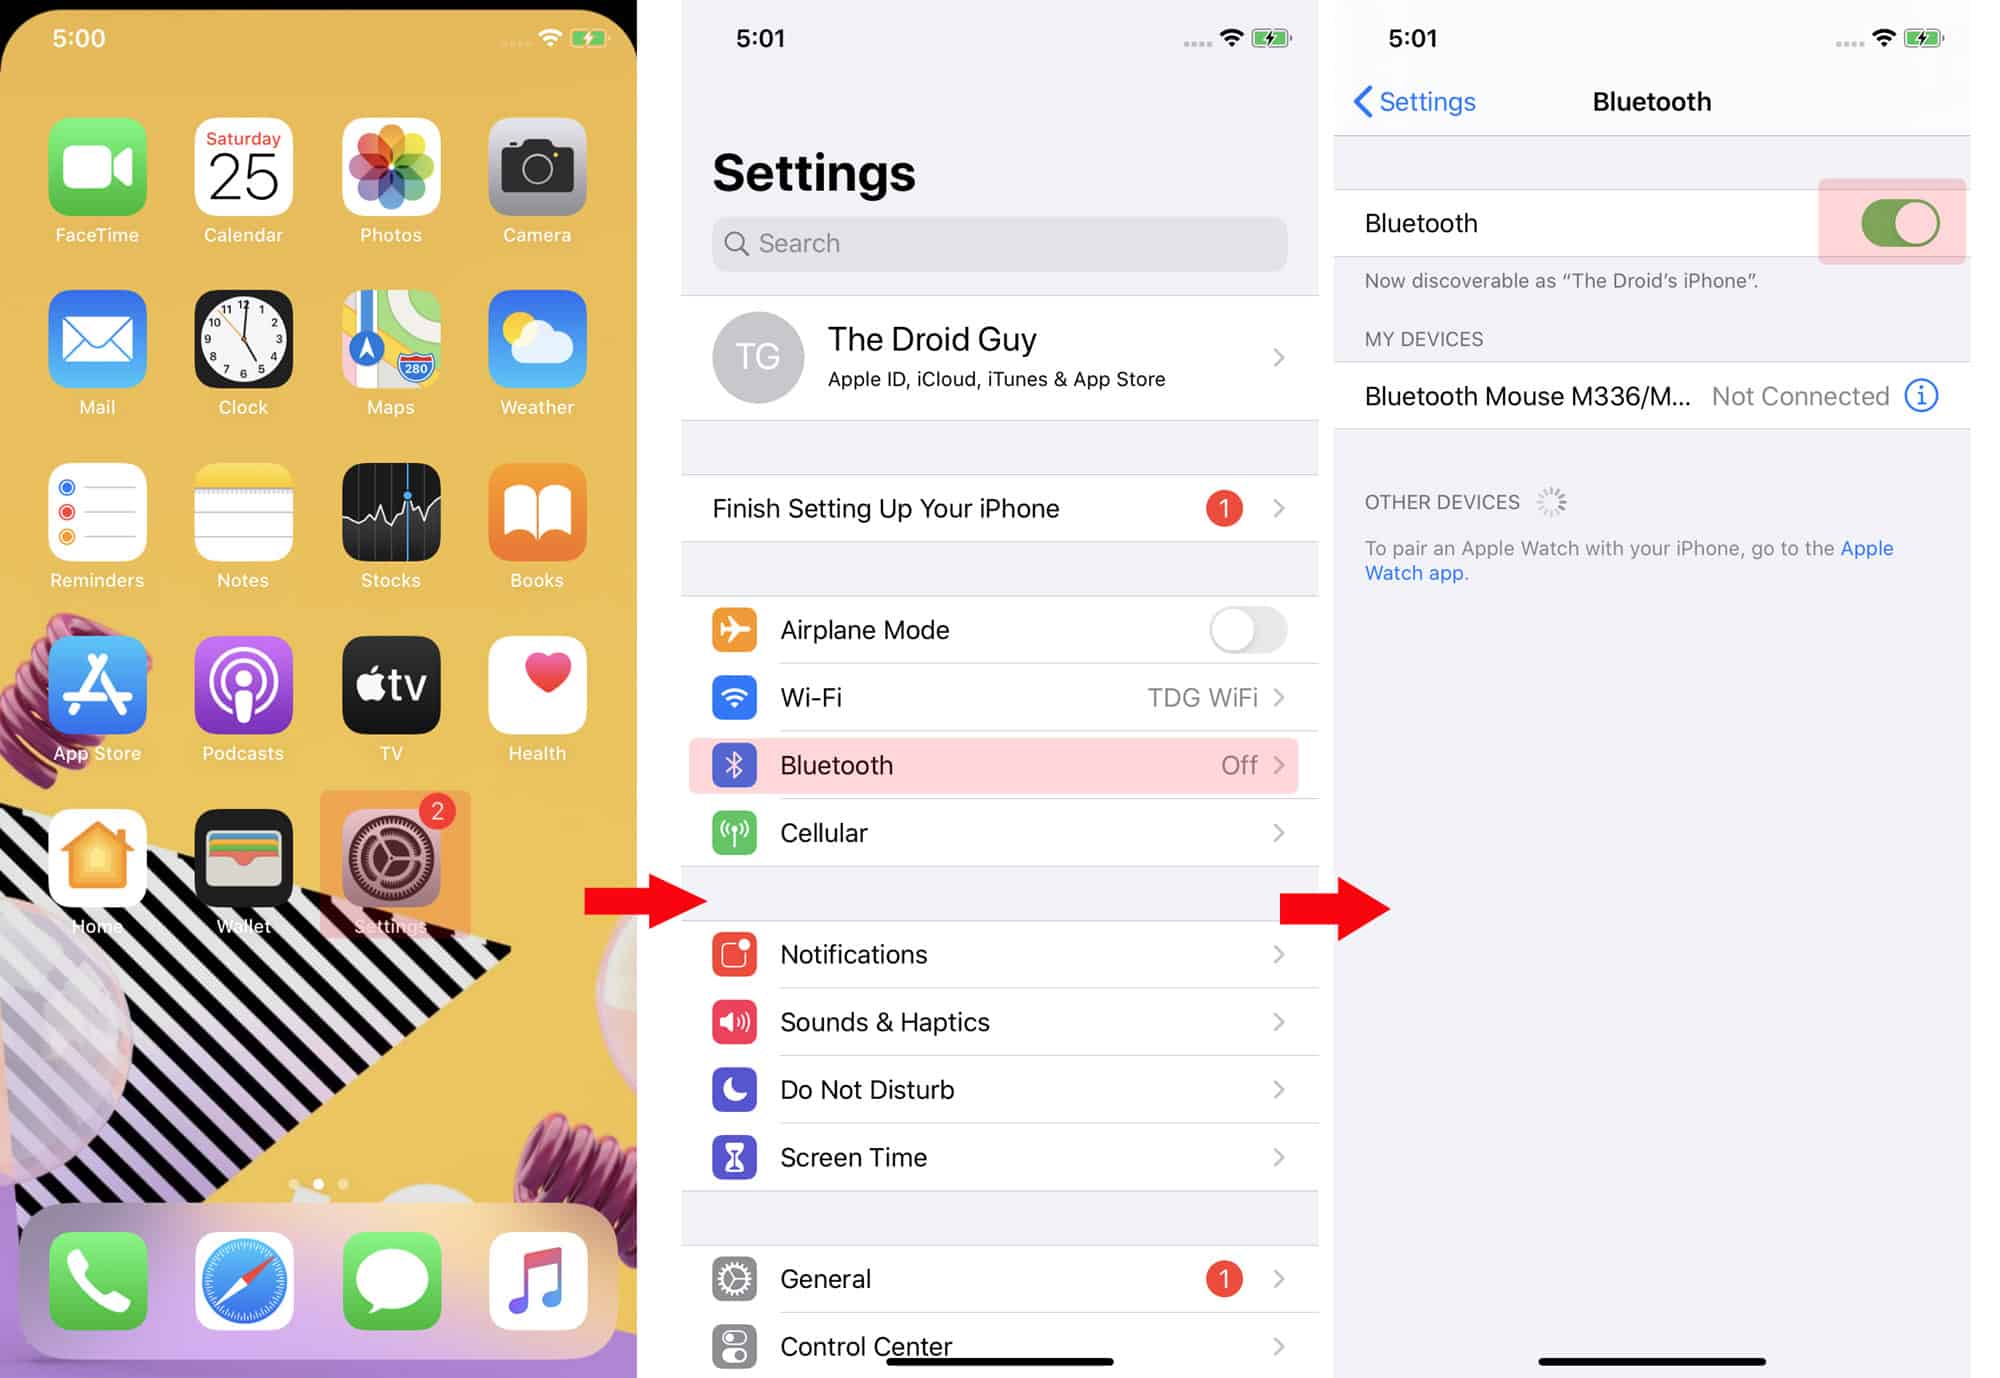 enable-bluetooth-iphone-ios-13-bluetooth-pairing-guide